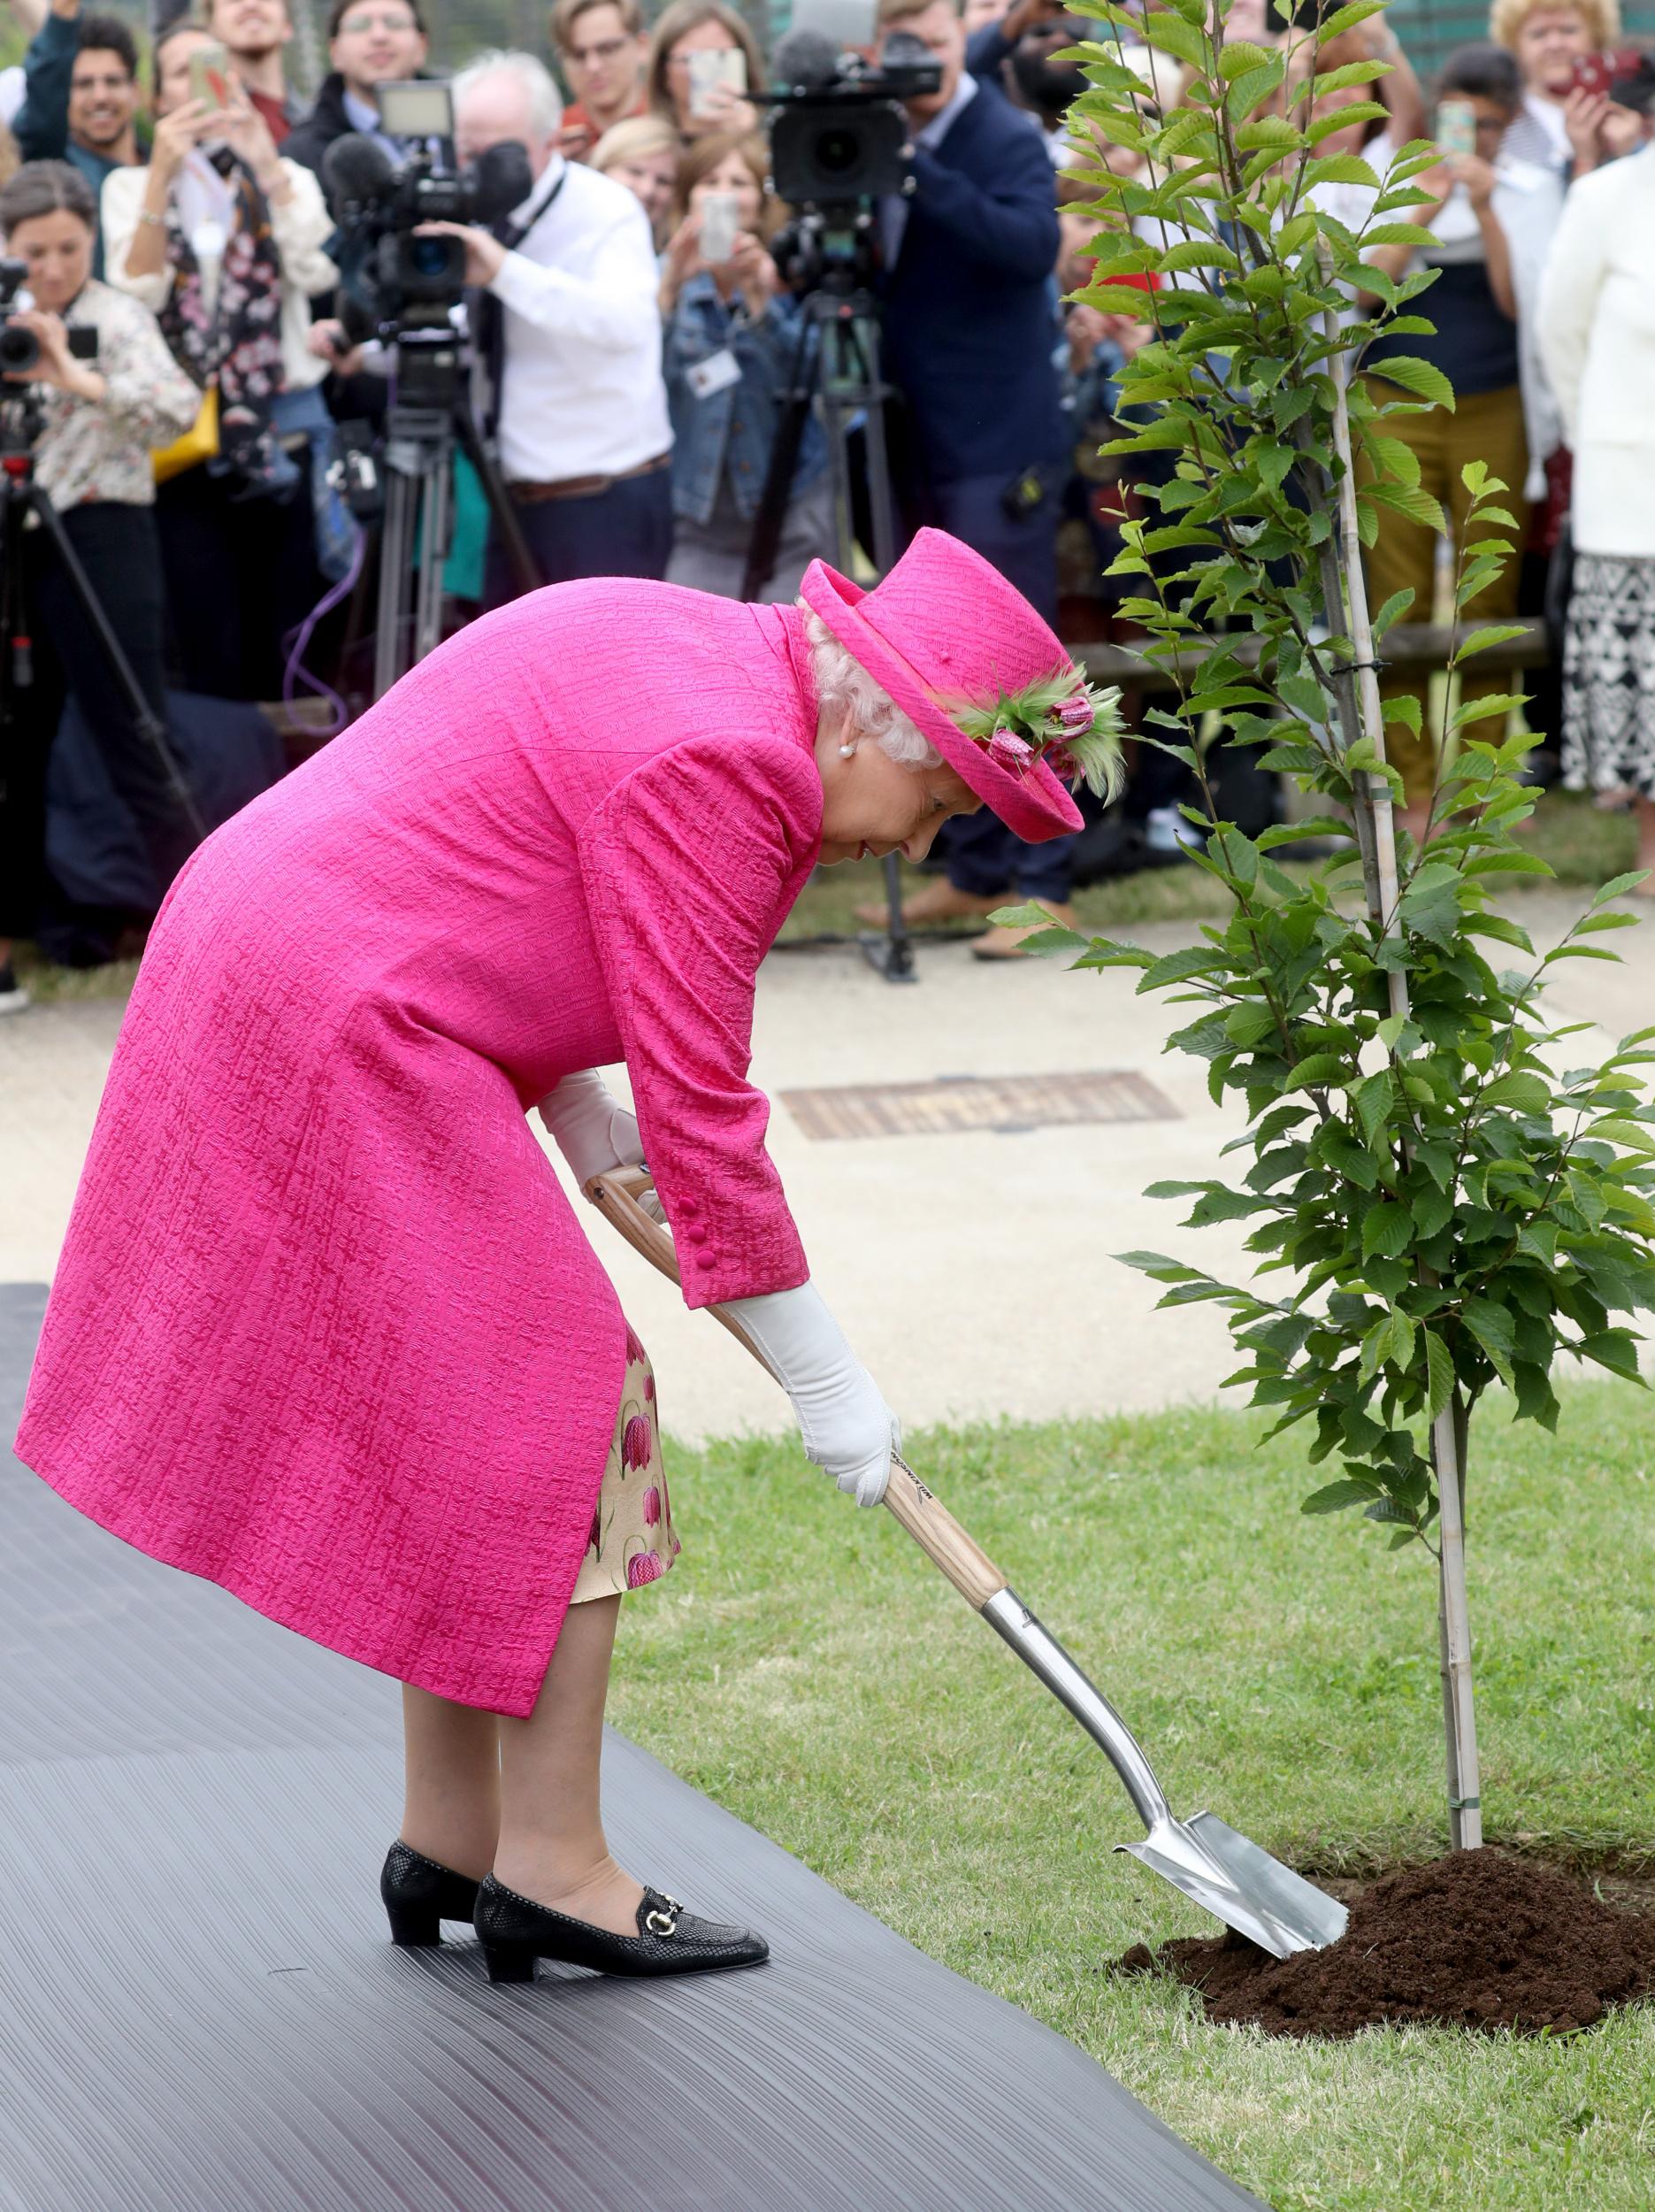 Queen Elizabeth II during a visit to the NIAB, (National Institute of Agricultural Botany) on July 09, 2019 in Cambridge, England.